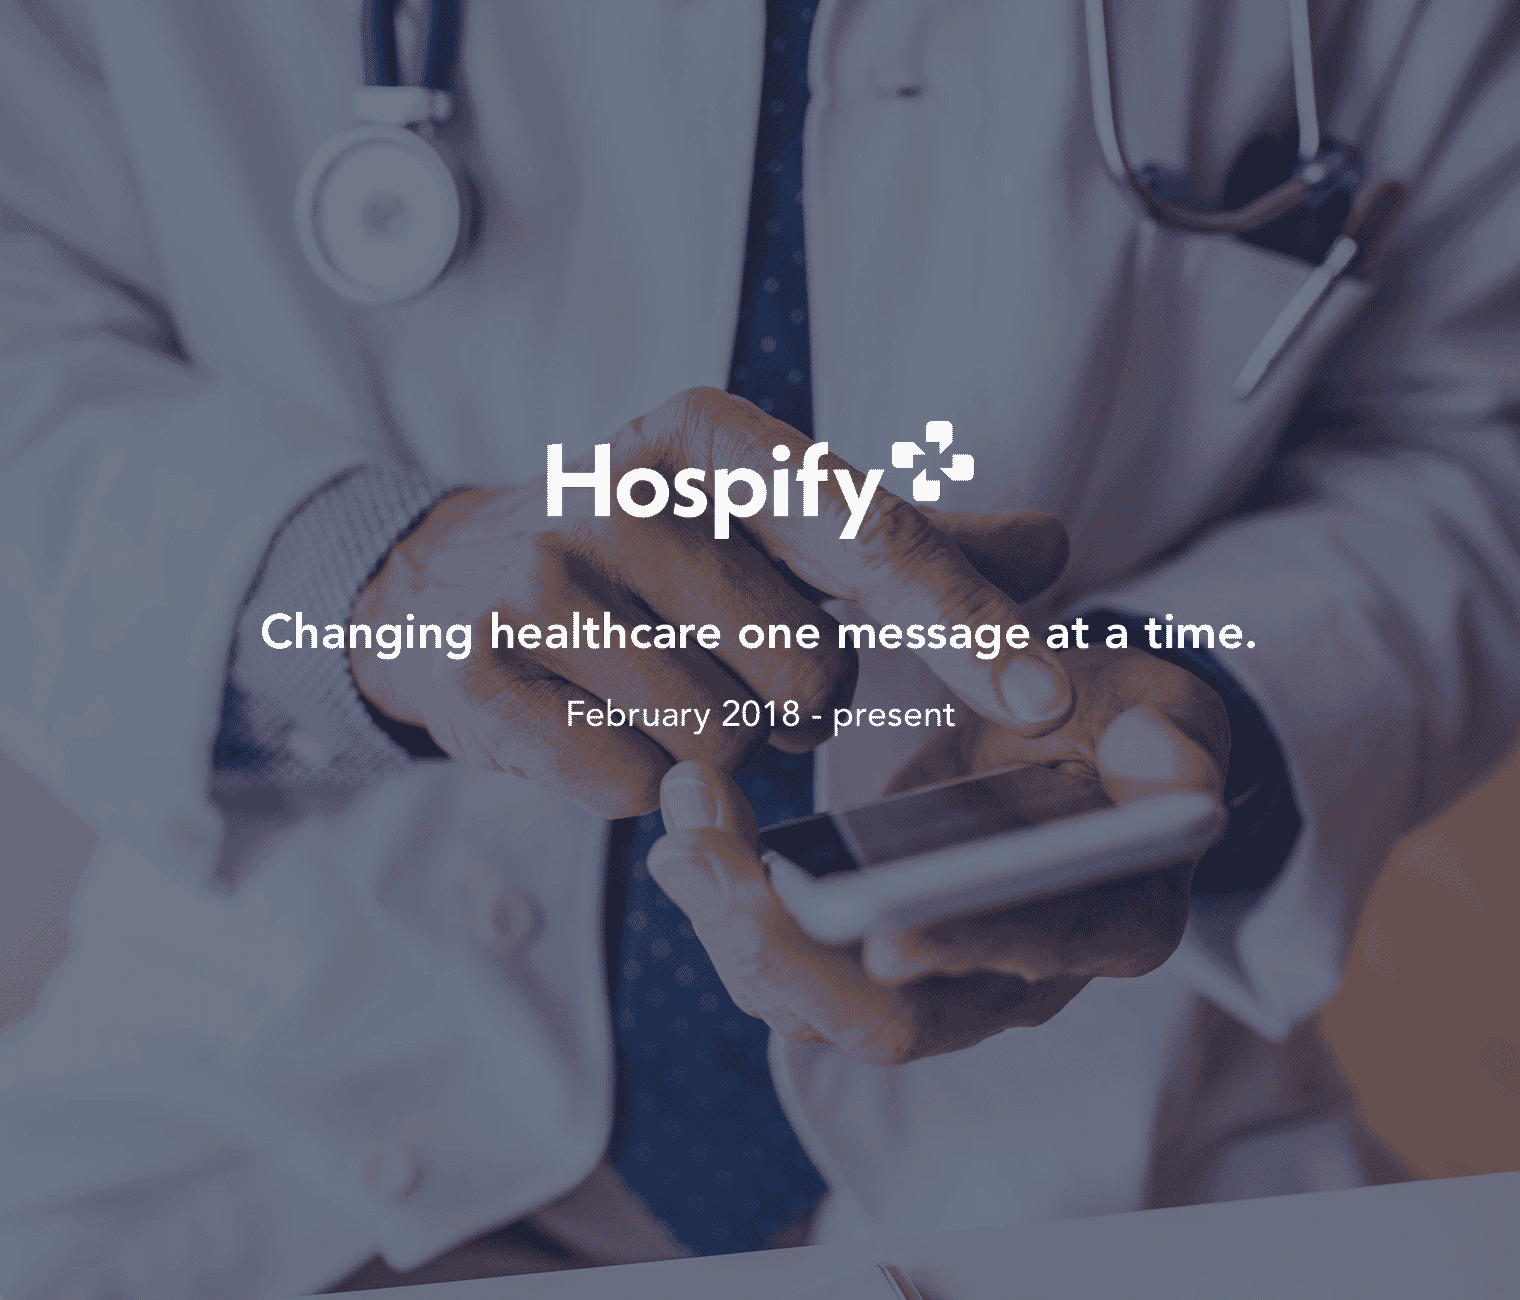 The Healthcare messaging platform supporting the NHS